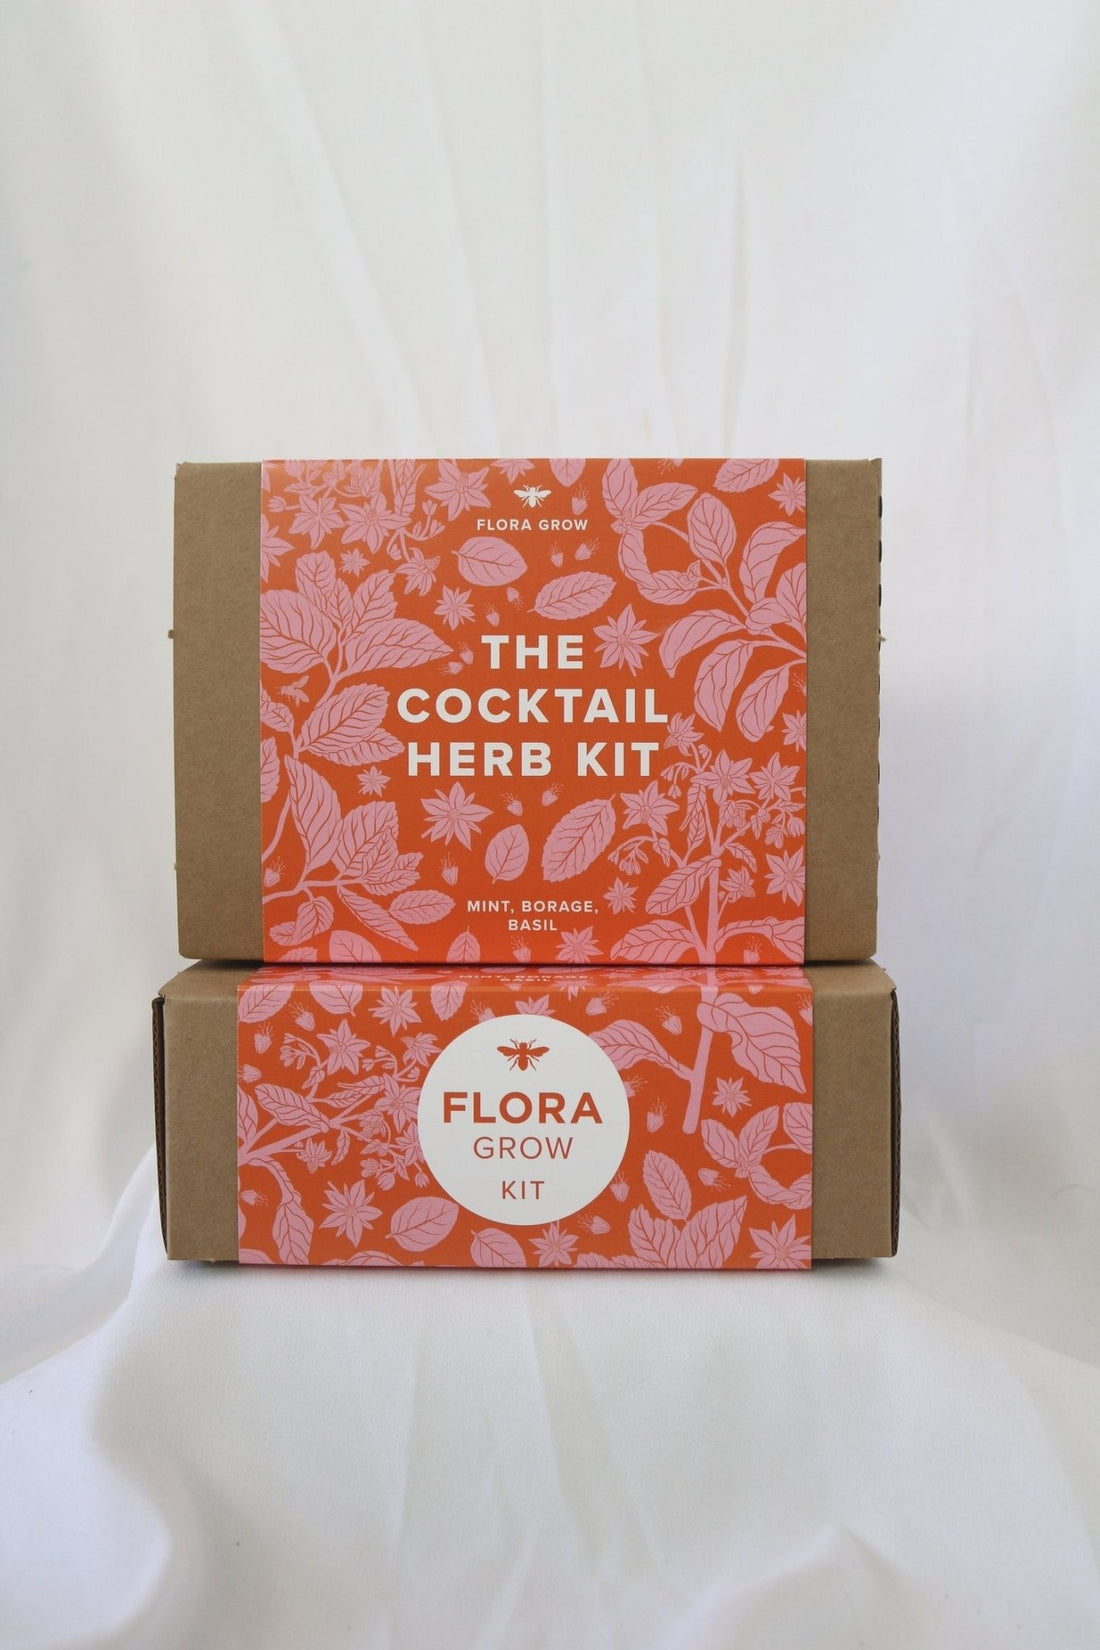 The Cocktail Herb Kit - The Flower Crate